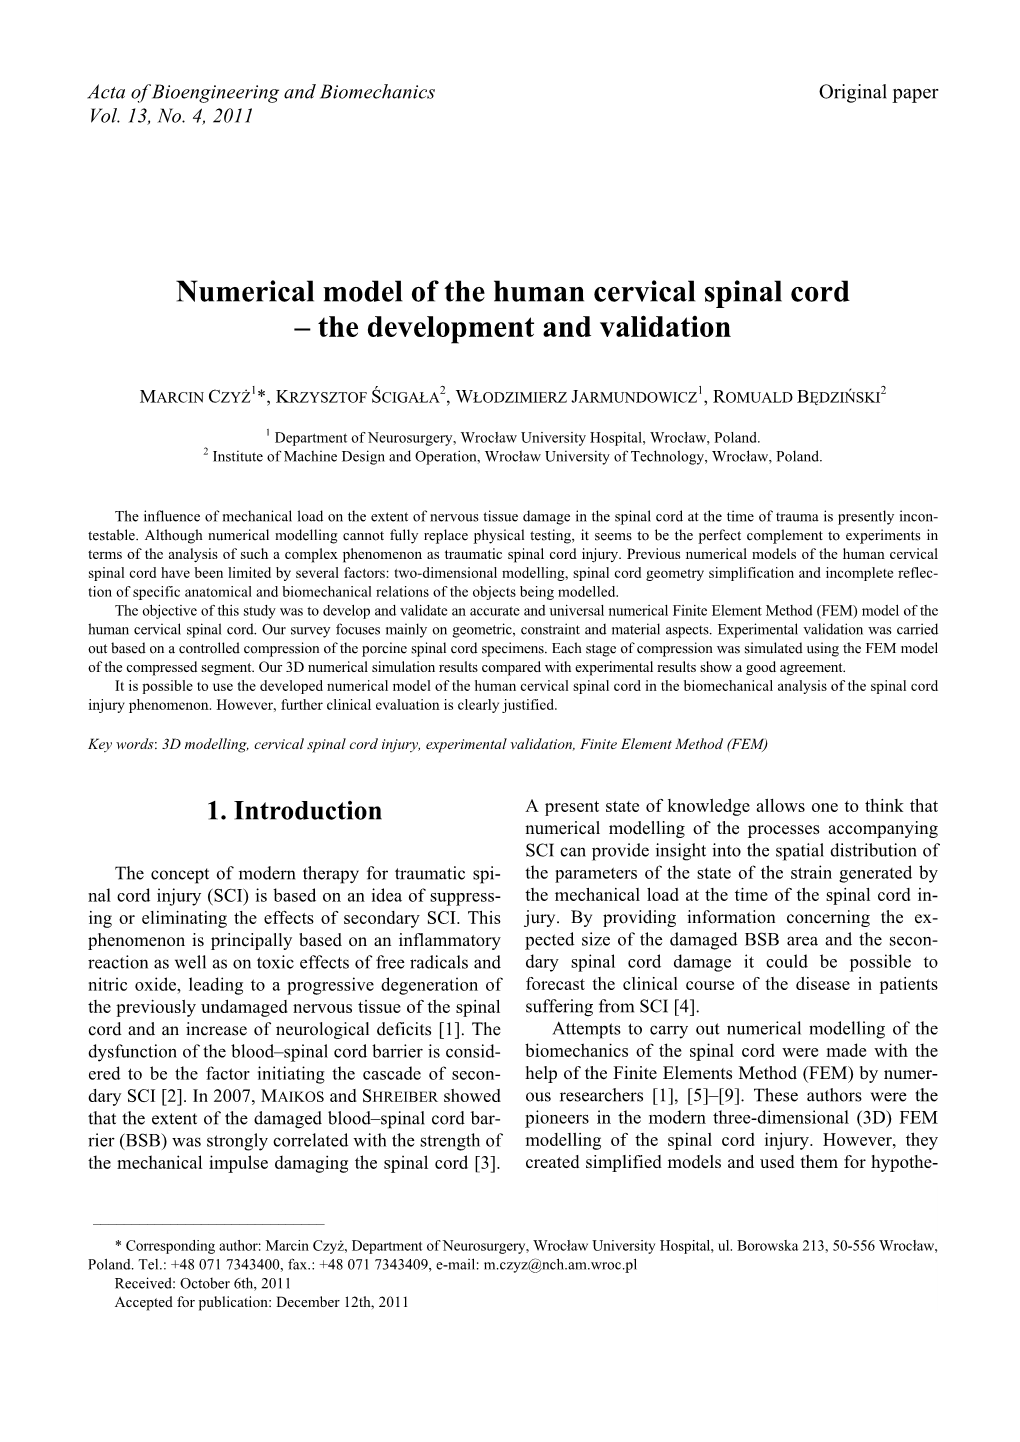 Numerical Model of the Human Cervical Spinal Cord – the Development and Validation